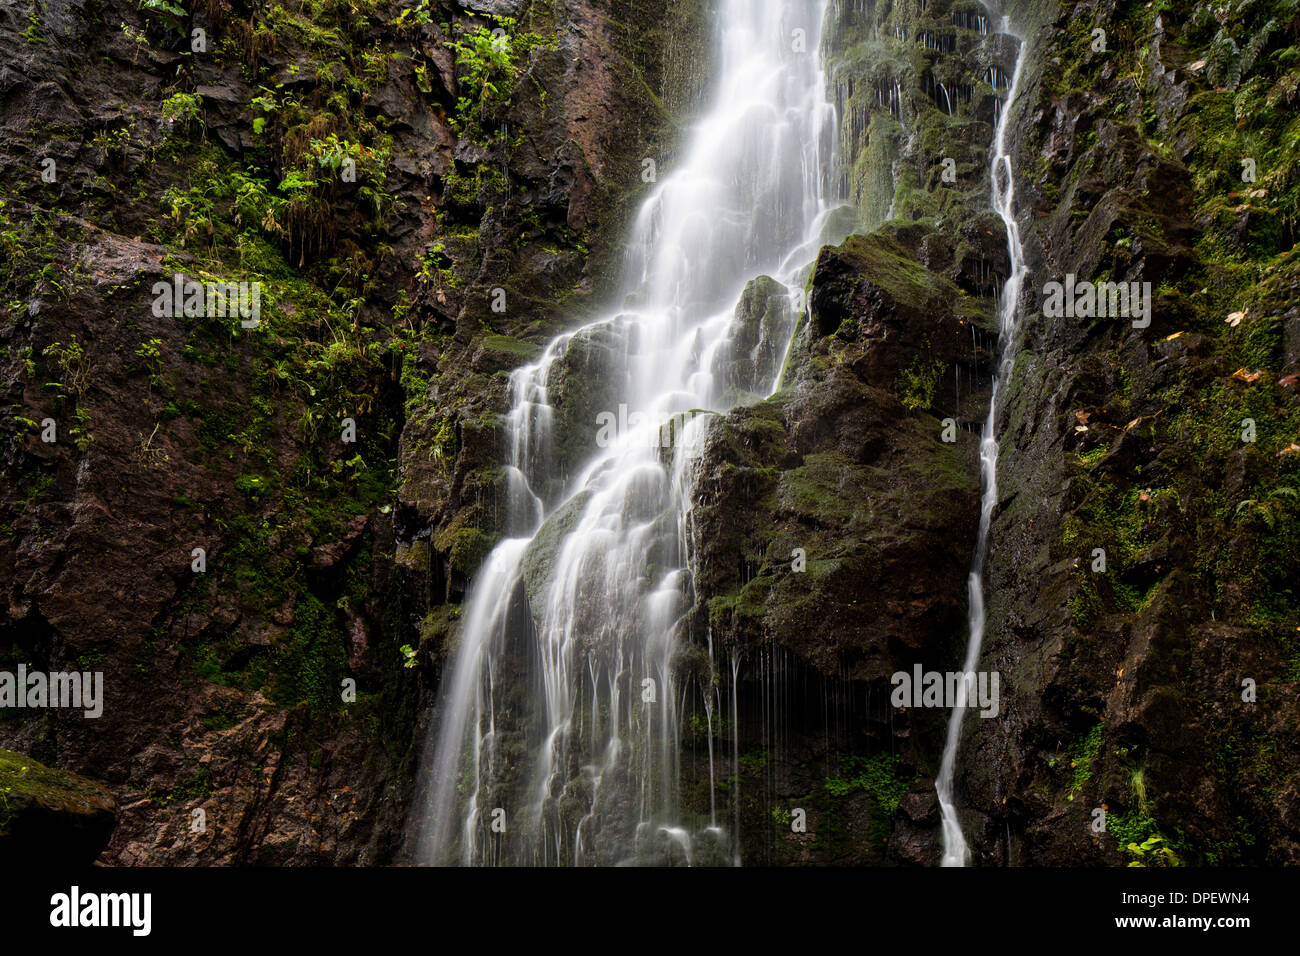 Waterfall in the forest, Burgbach waterfall near Schapbach, Black Forest, Baden-Württemberg, Germany Stock Photo